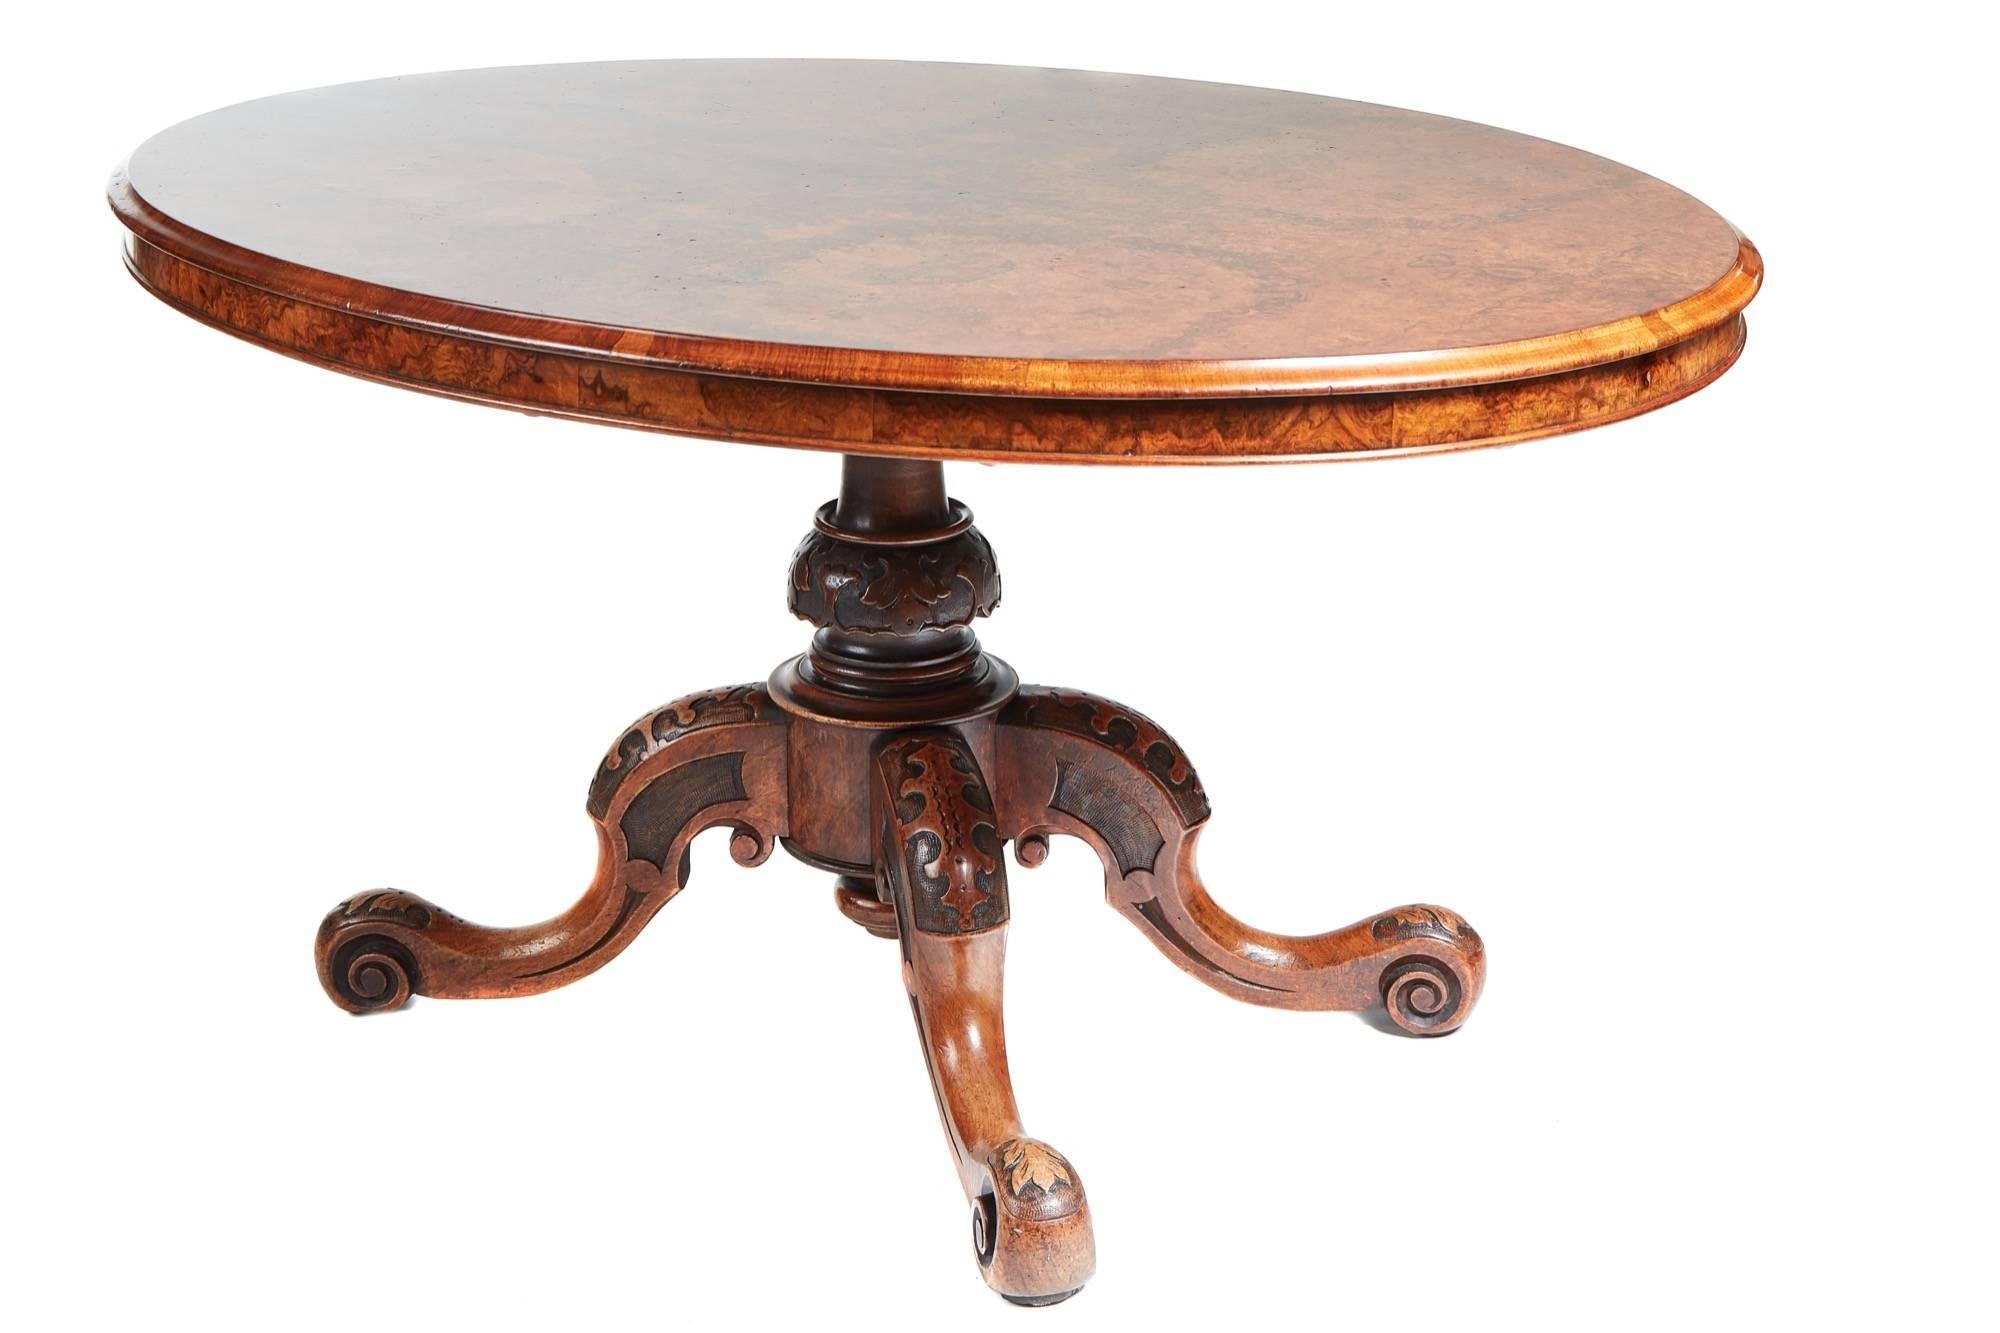 Fine quality Victorian oval burr walnut centre table, the tilt-top having fantastic matched burr walnut veneers with a thumb moulded edge, the base having a carved centre column supported by four carved cabriole legs all in solid walnut
Fantastic